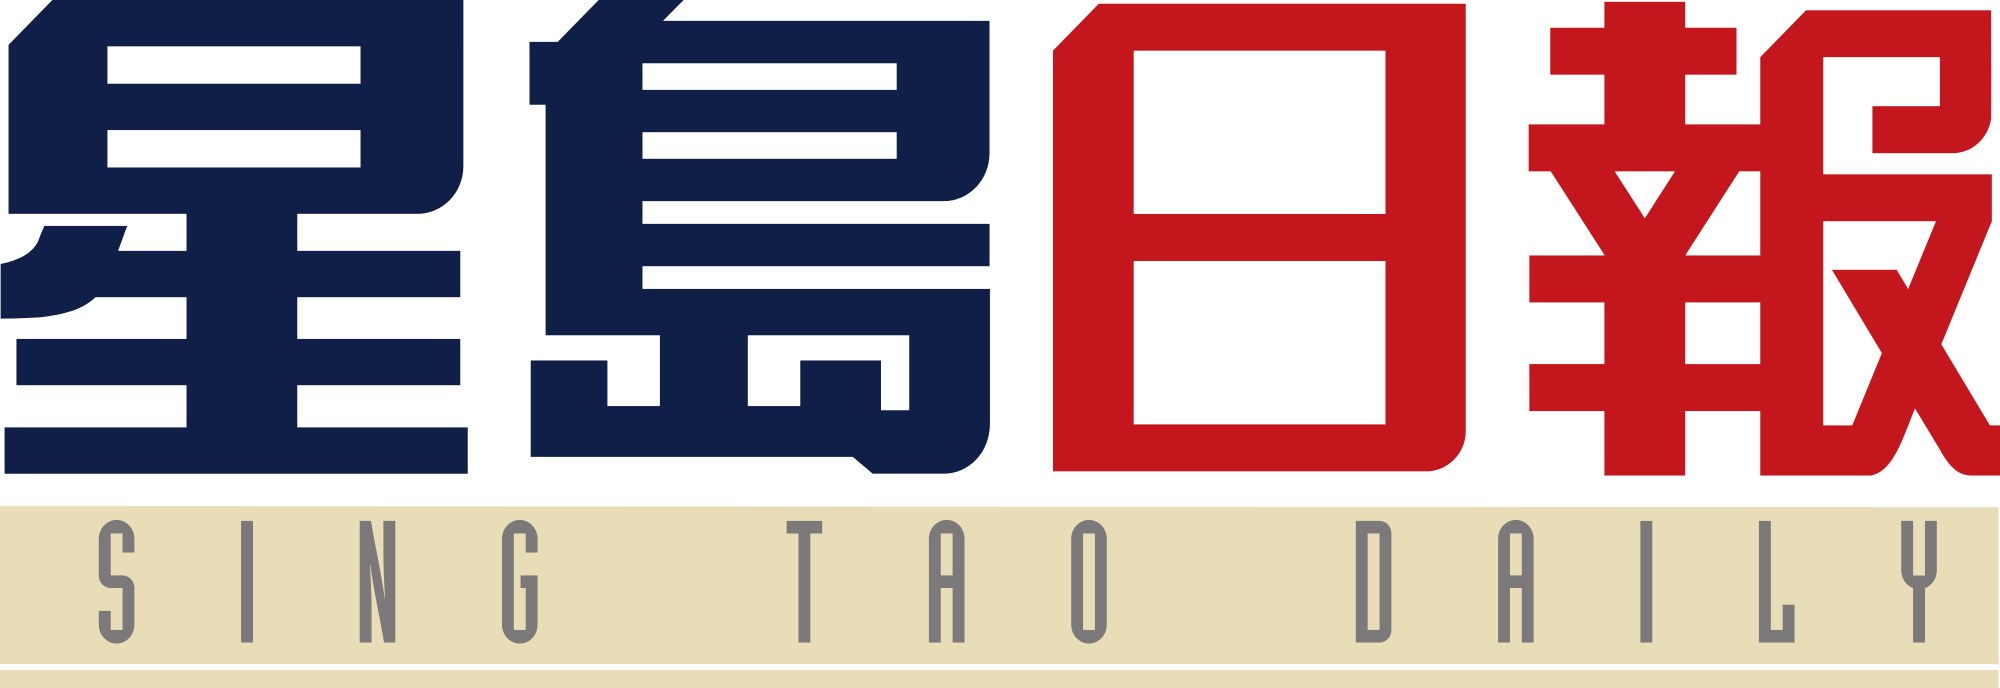 2000px-Sing_Tao_Daily_logo.svg.png